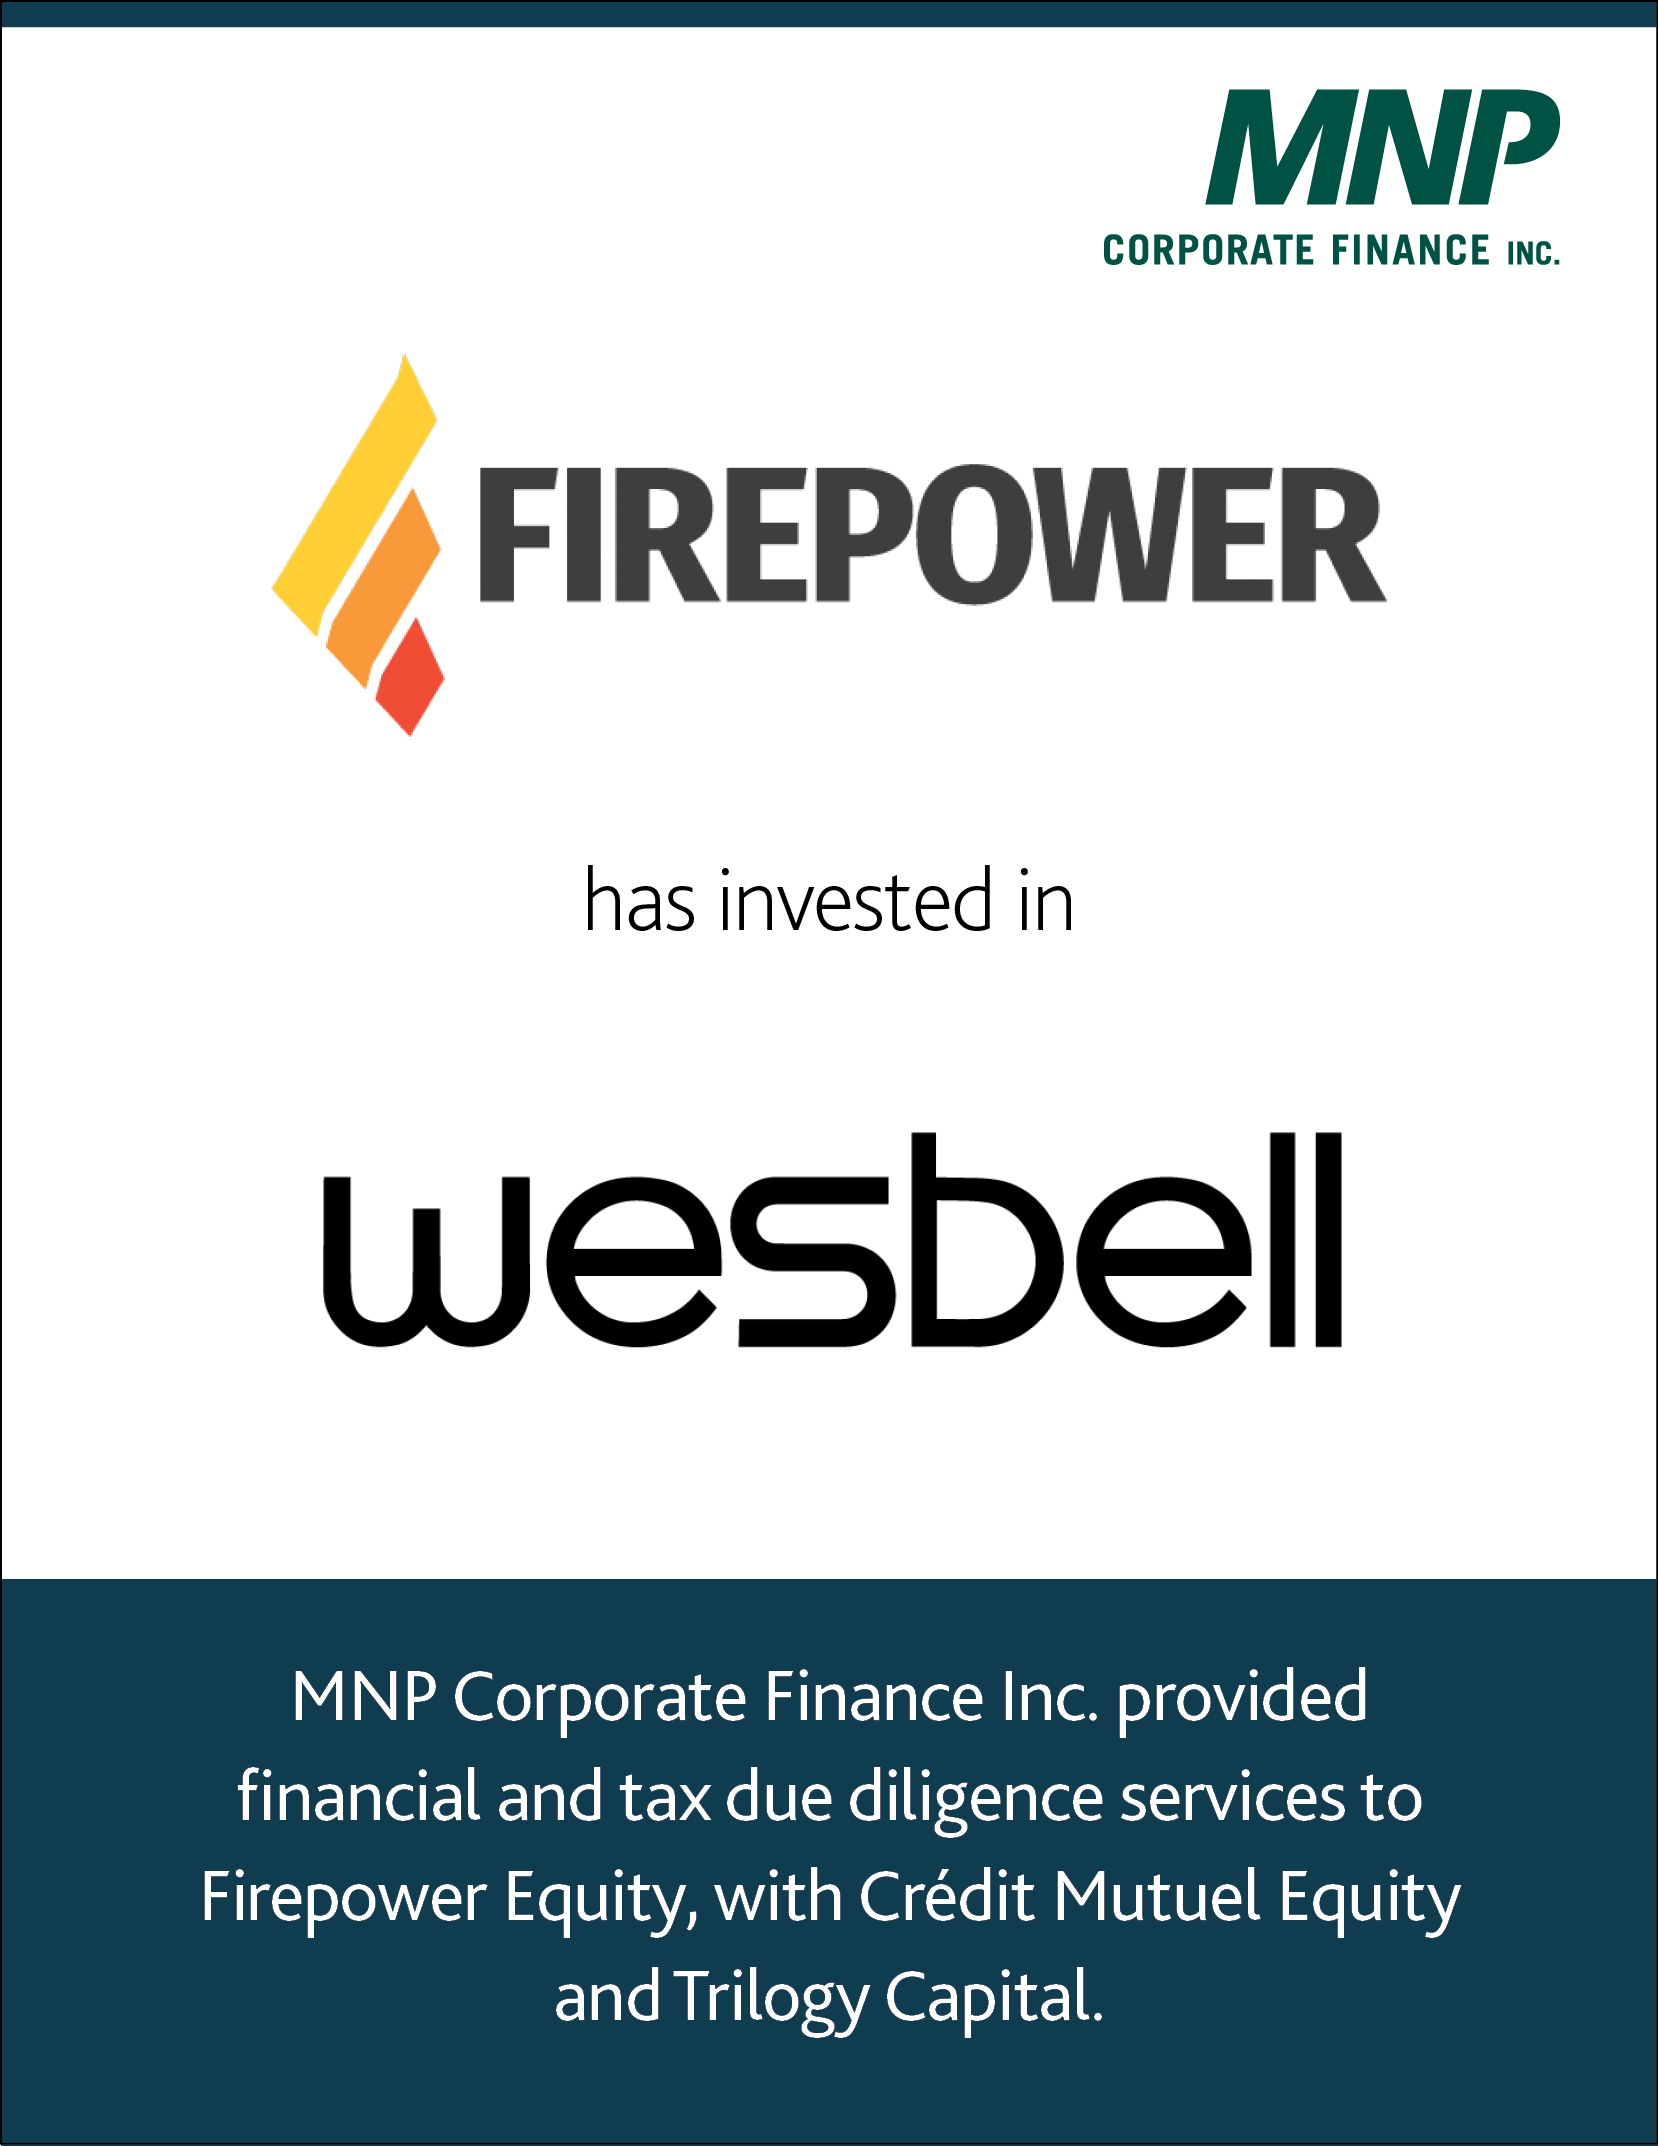 Firepower Equity, with Crédit Mutuel Equity and Trilogy Capital has invested in Wesbell Technologies and Wesbell Investment Recovery